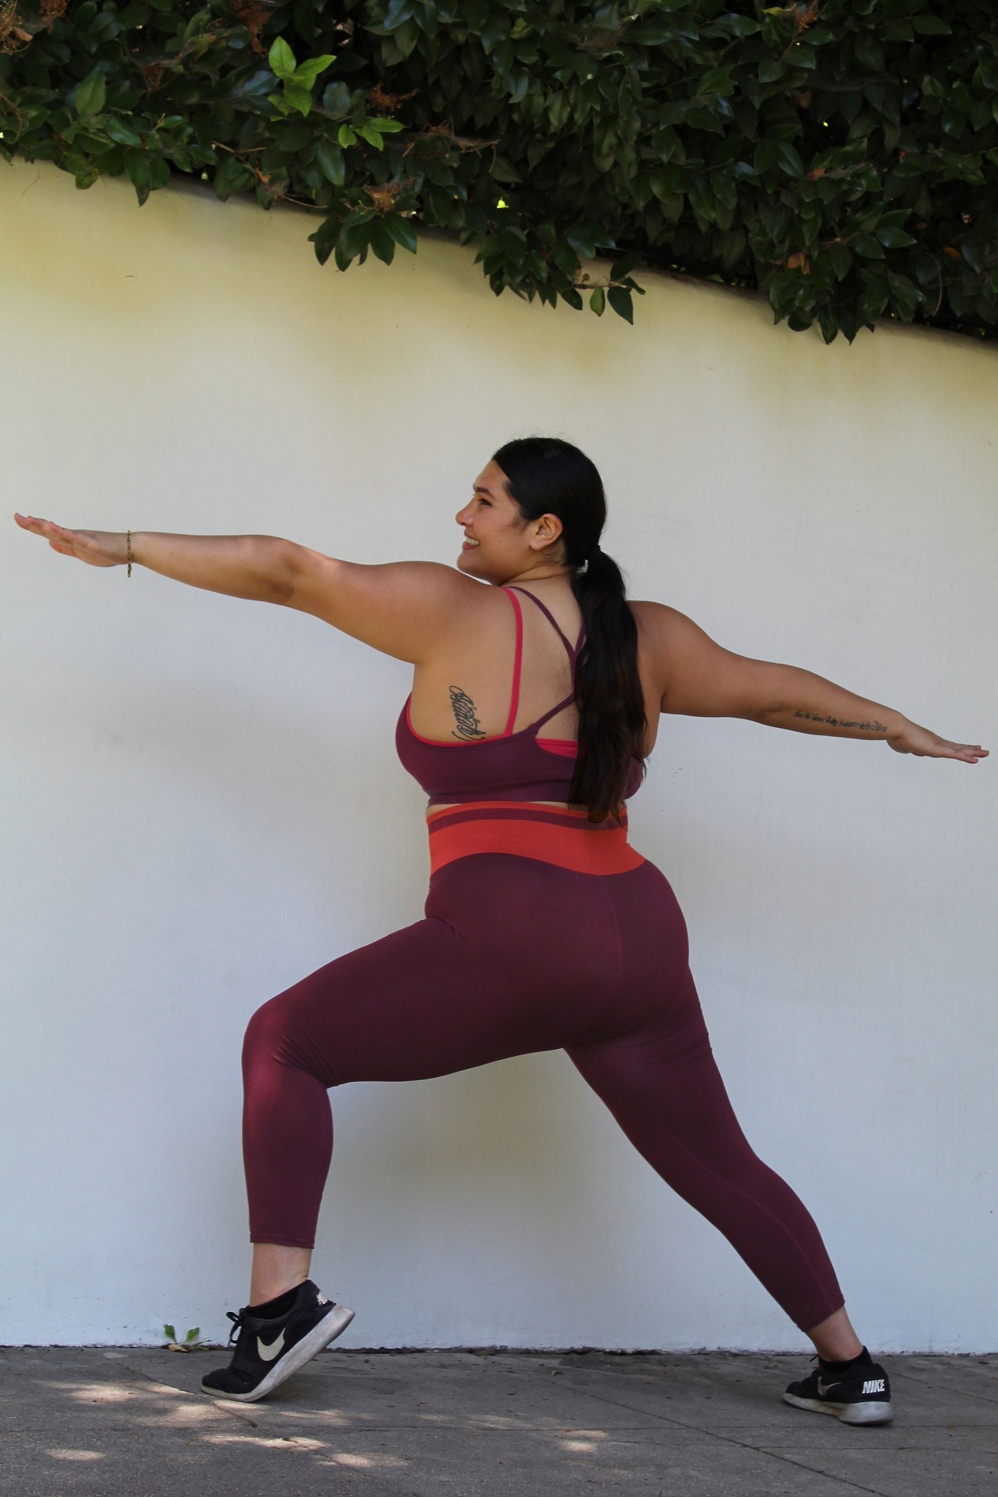 These @Enerbloom creme leggings are absolutely everything! #gabriellav